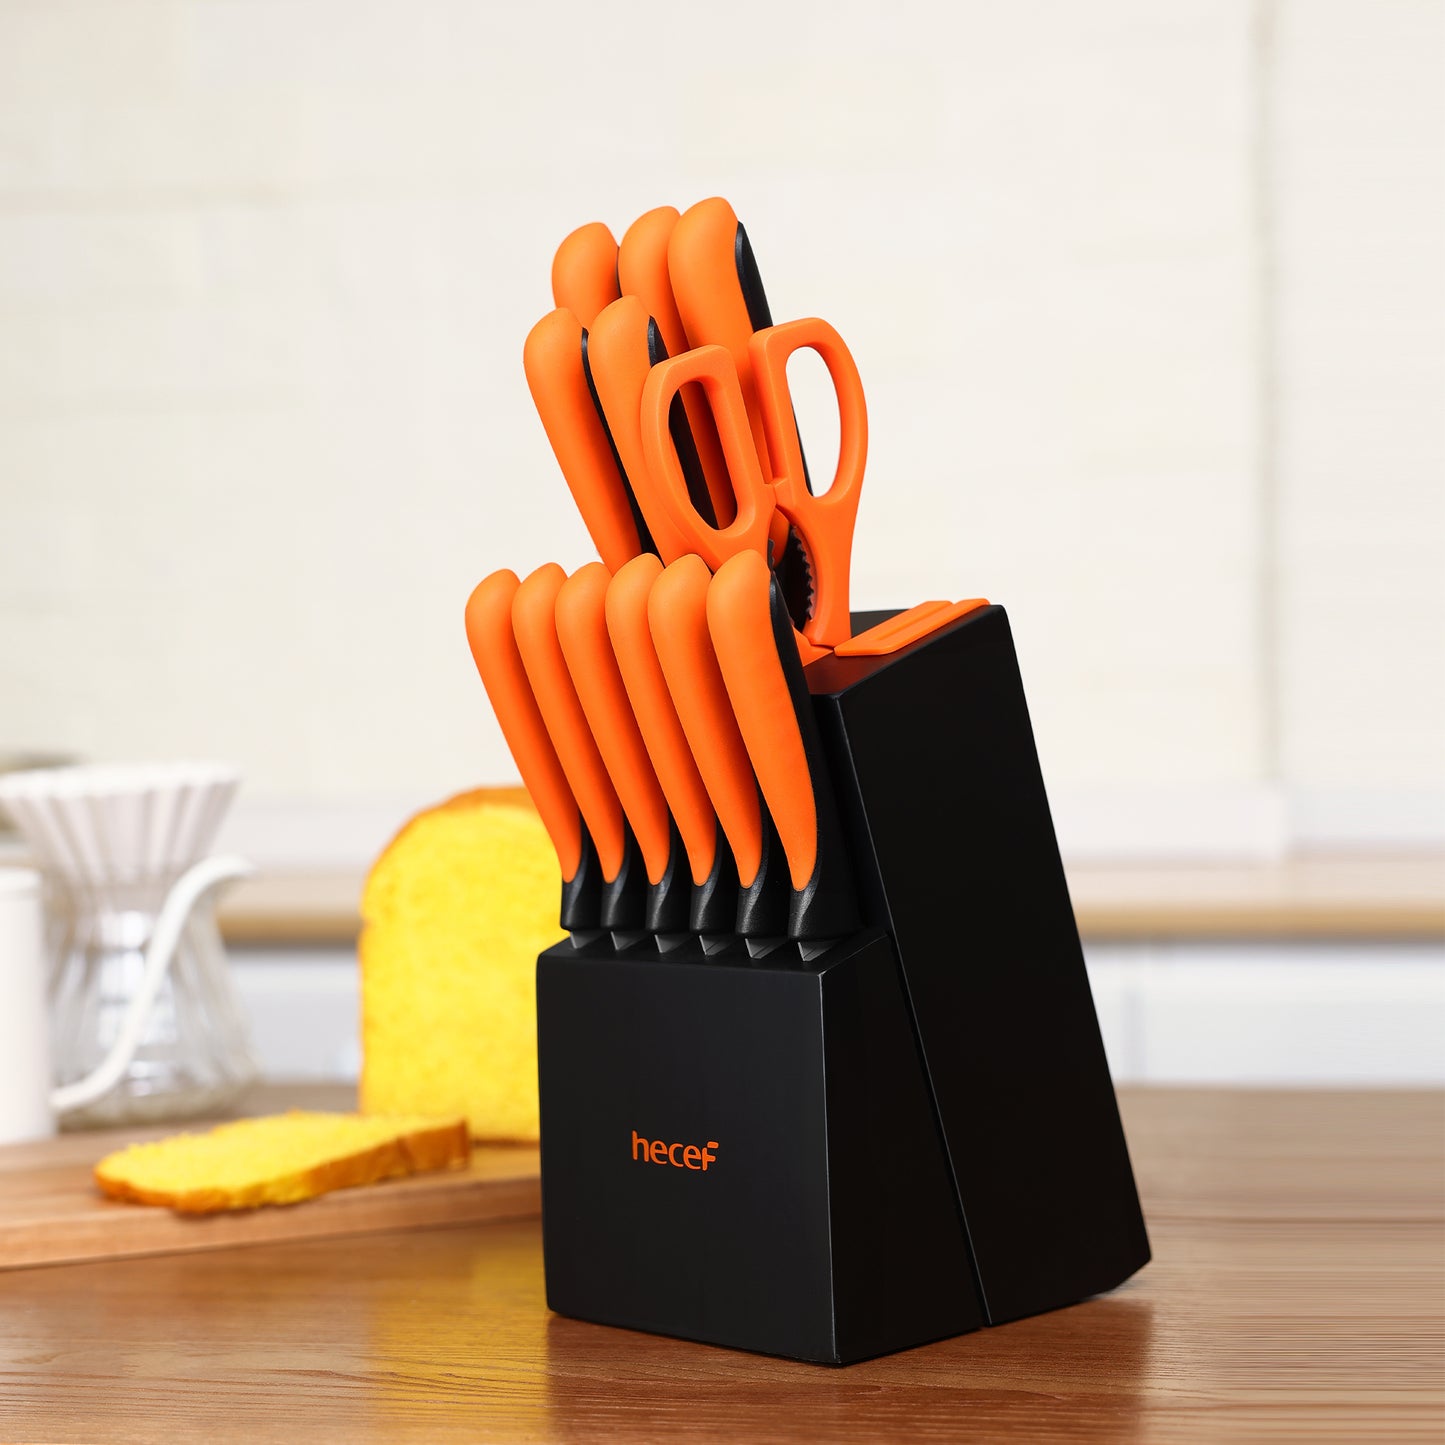 hecef knife block with knife, 13-piece kitchen knife set with wooden block and built-in sharpener, professional knife set with steak knives and kitchen scissors, etc - Hecef Kitchen